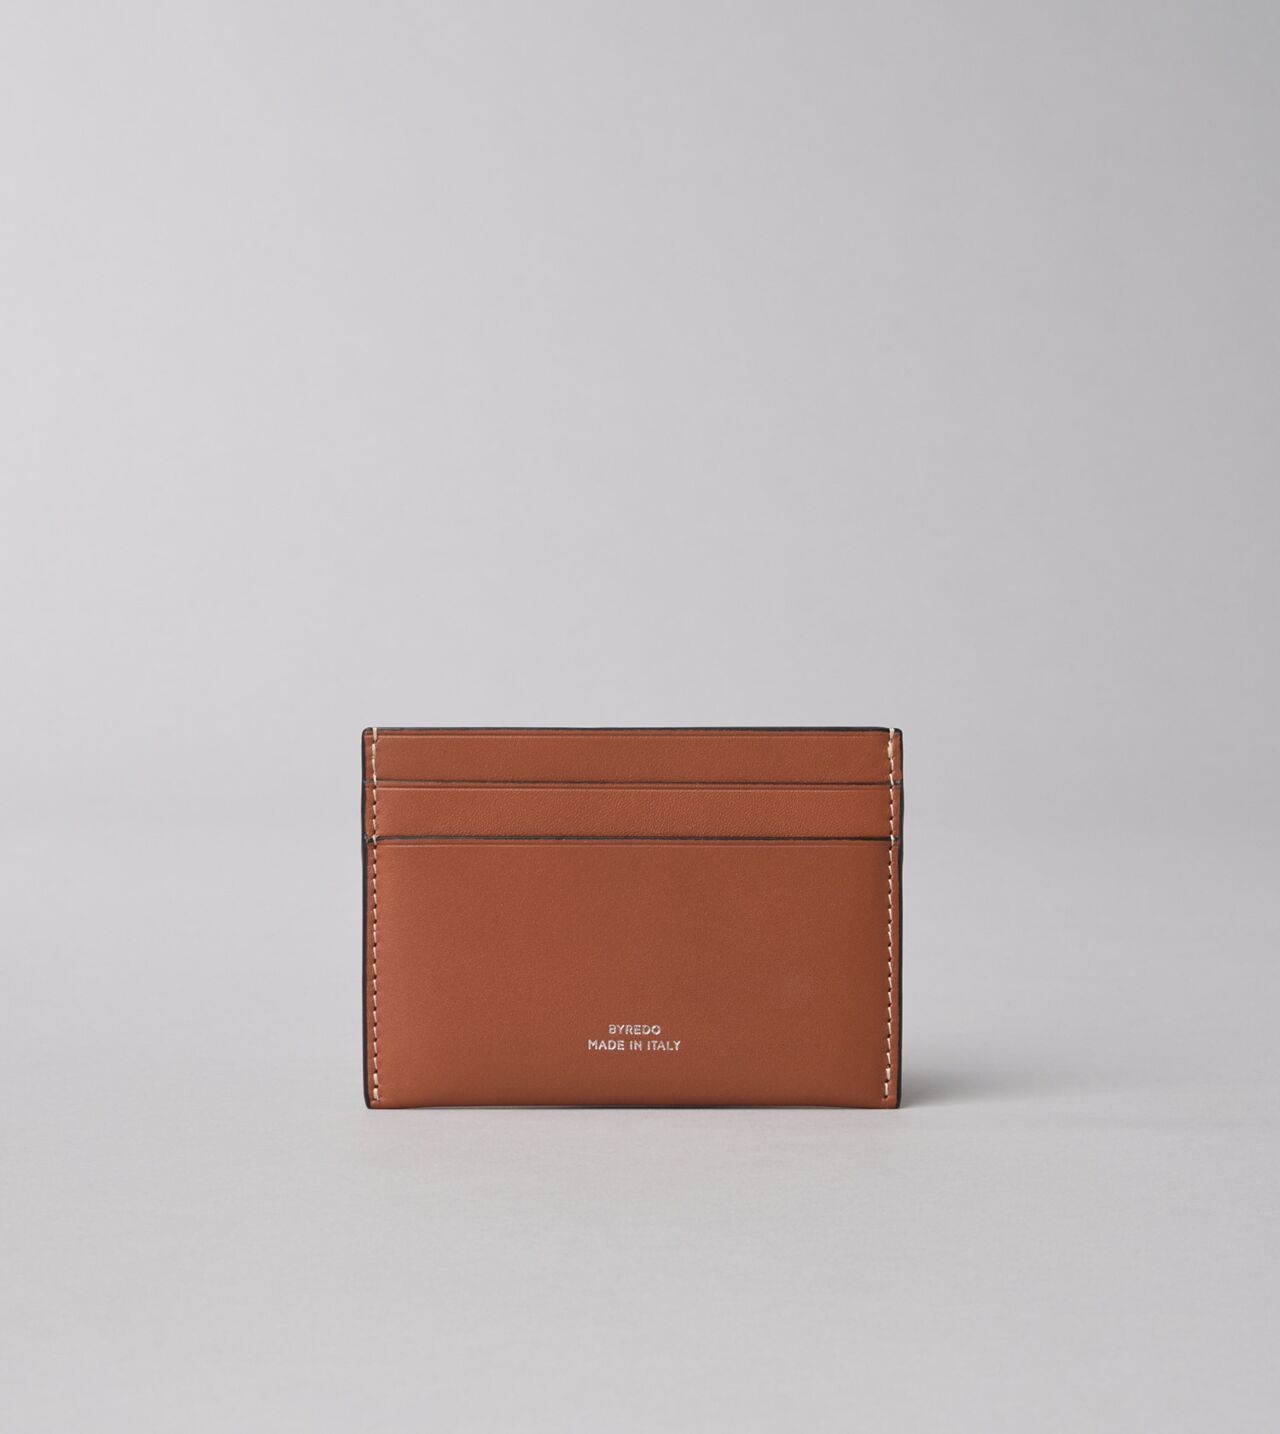 Credit Card Holder in Saddle Tan Leather